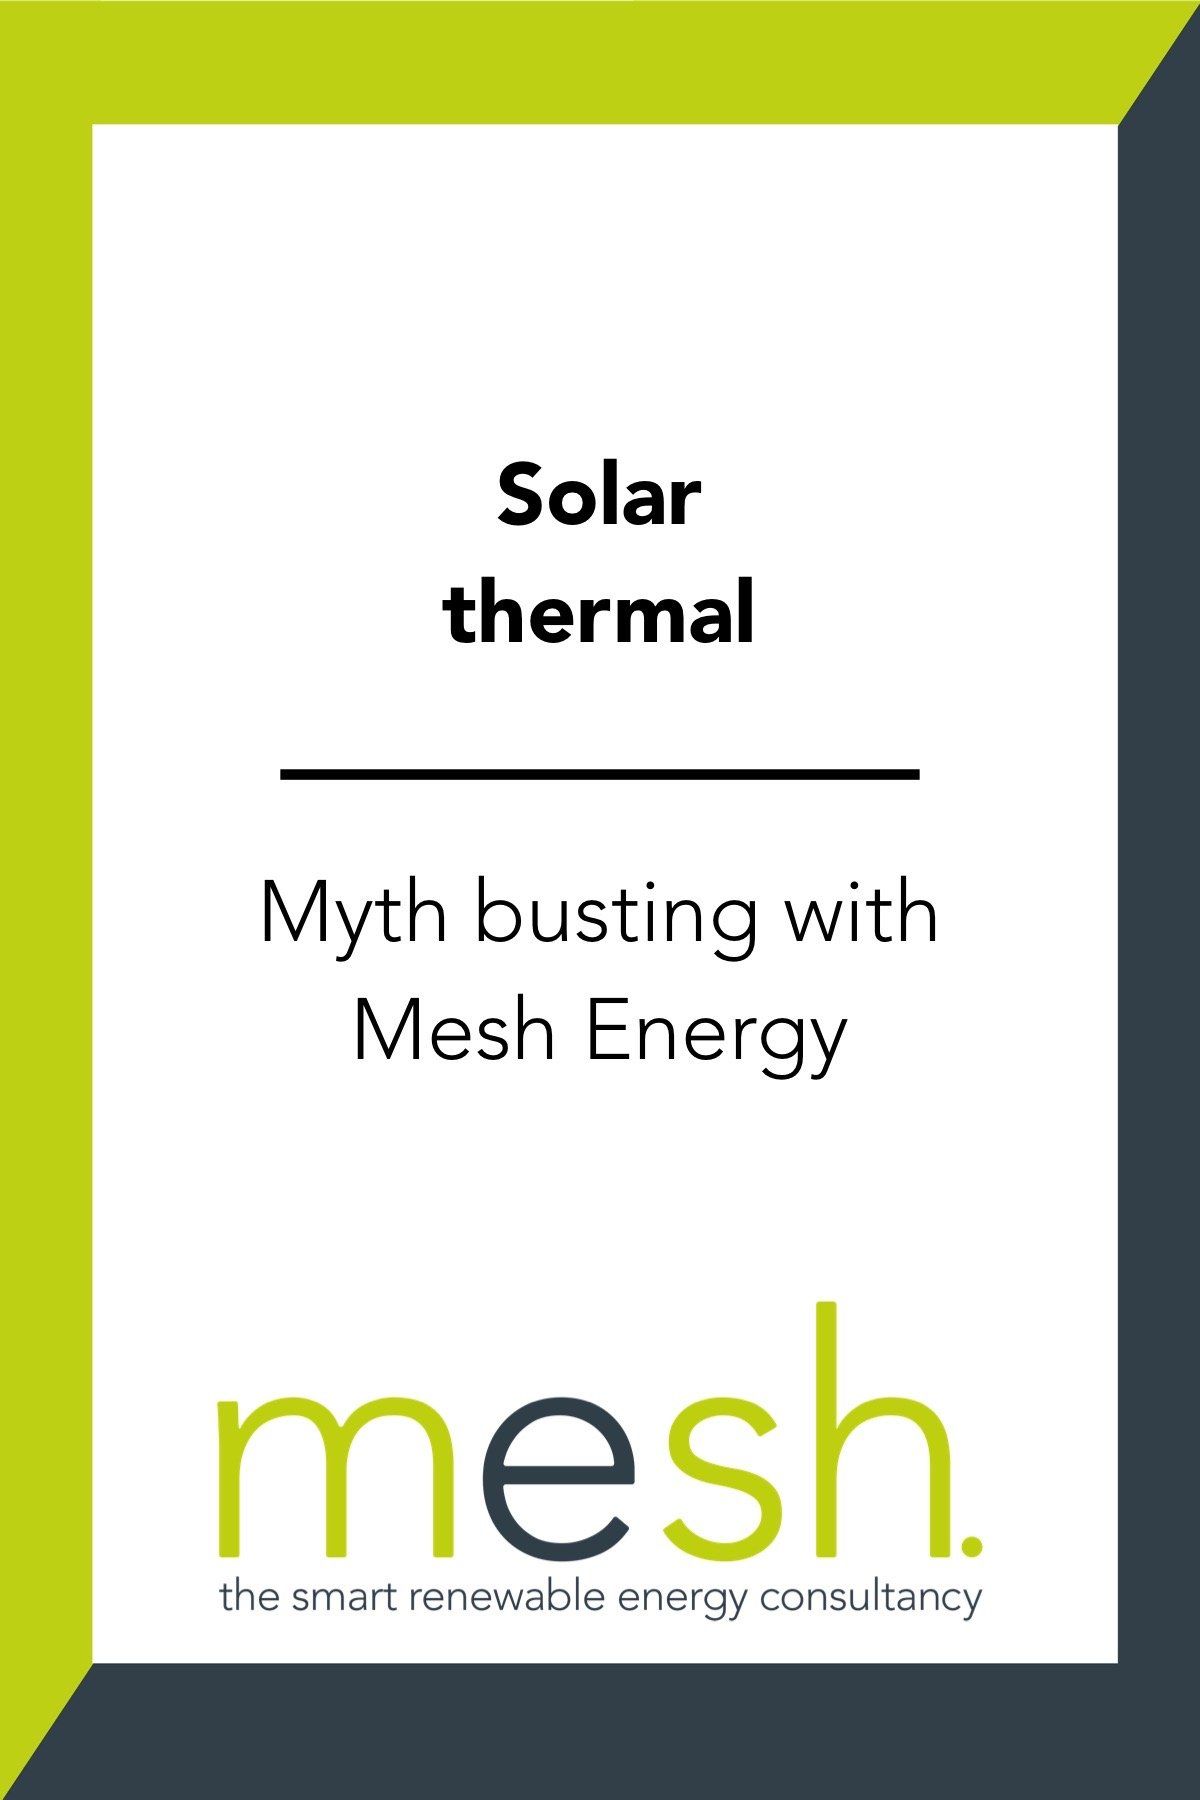 Underfloor heating: 7 myths busted! Mythbusting with Mesh Energy